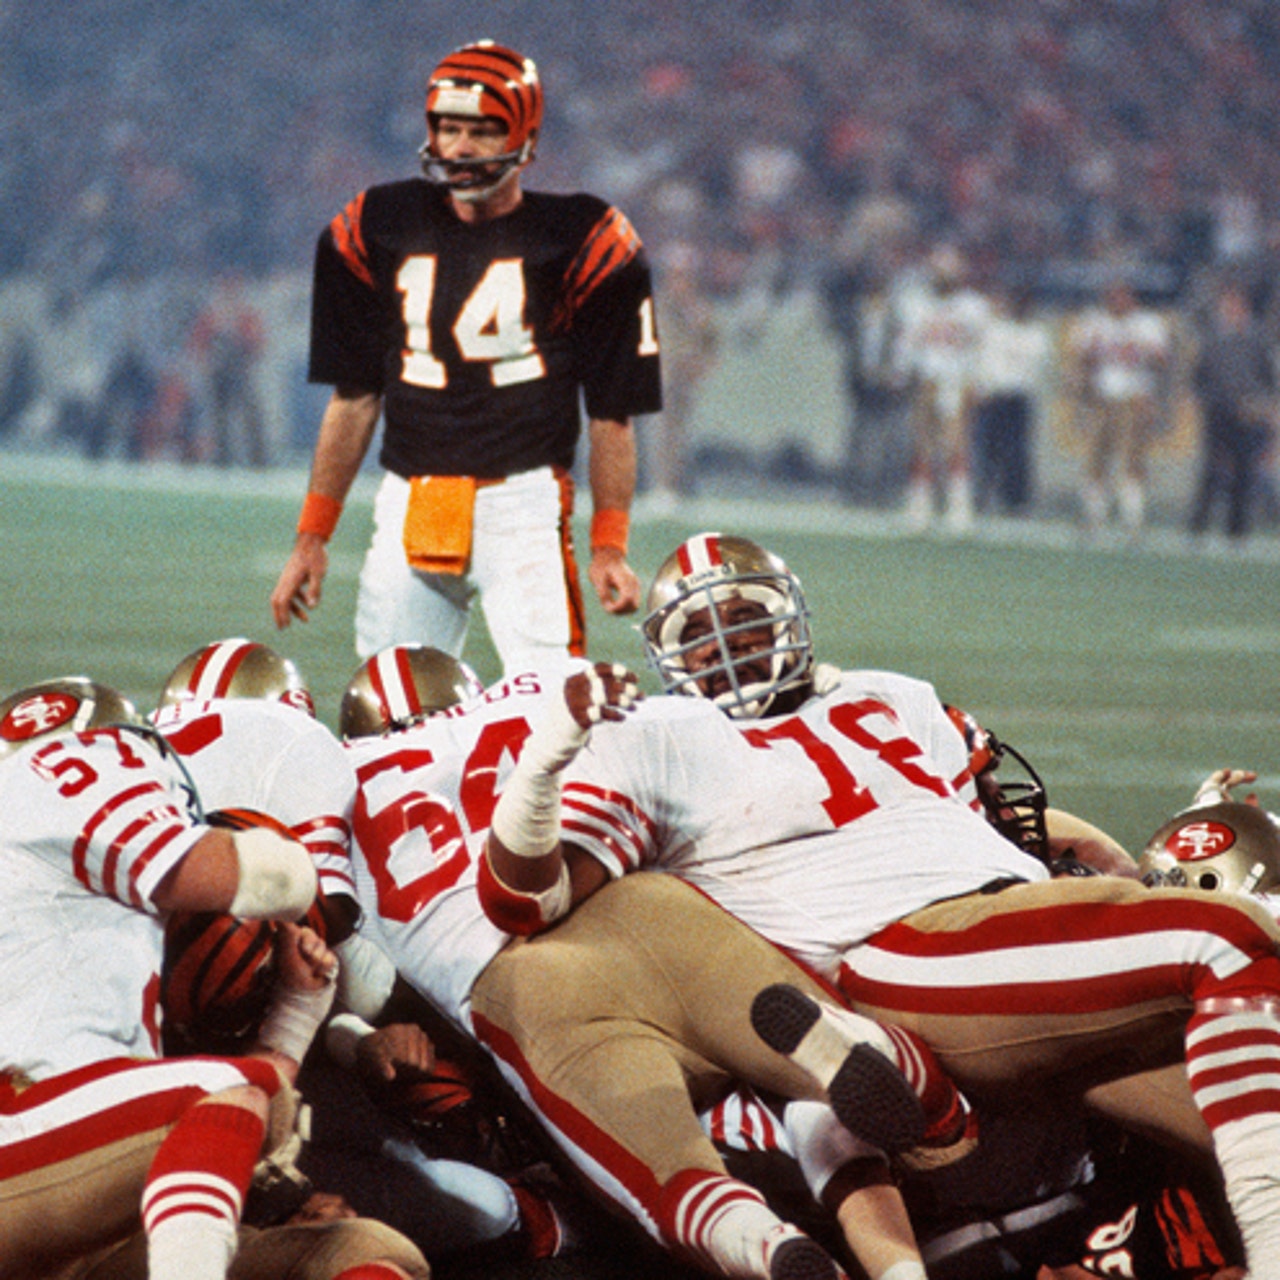 Super Bowl moment No. 13: The 49ers stand tall at the goal line